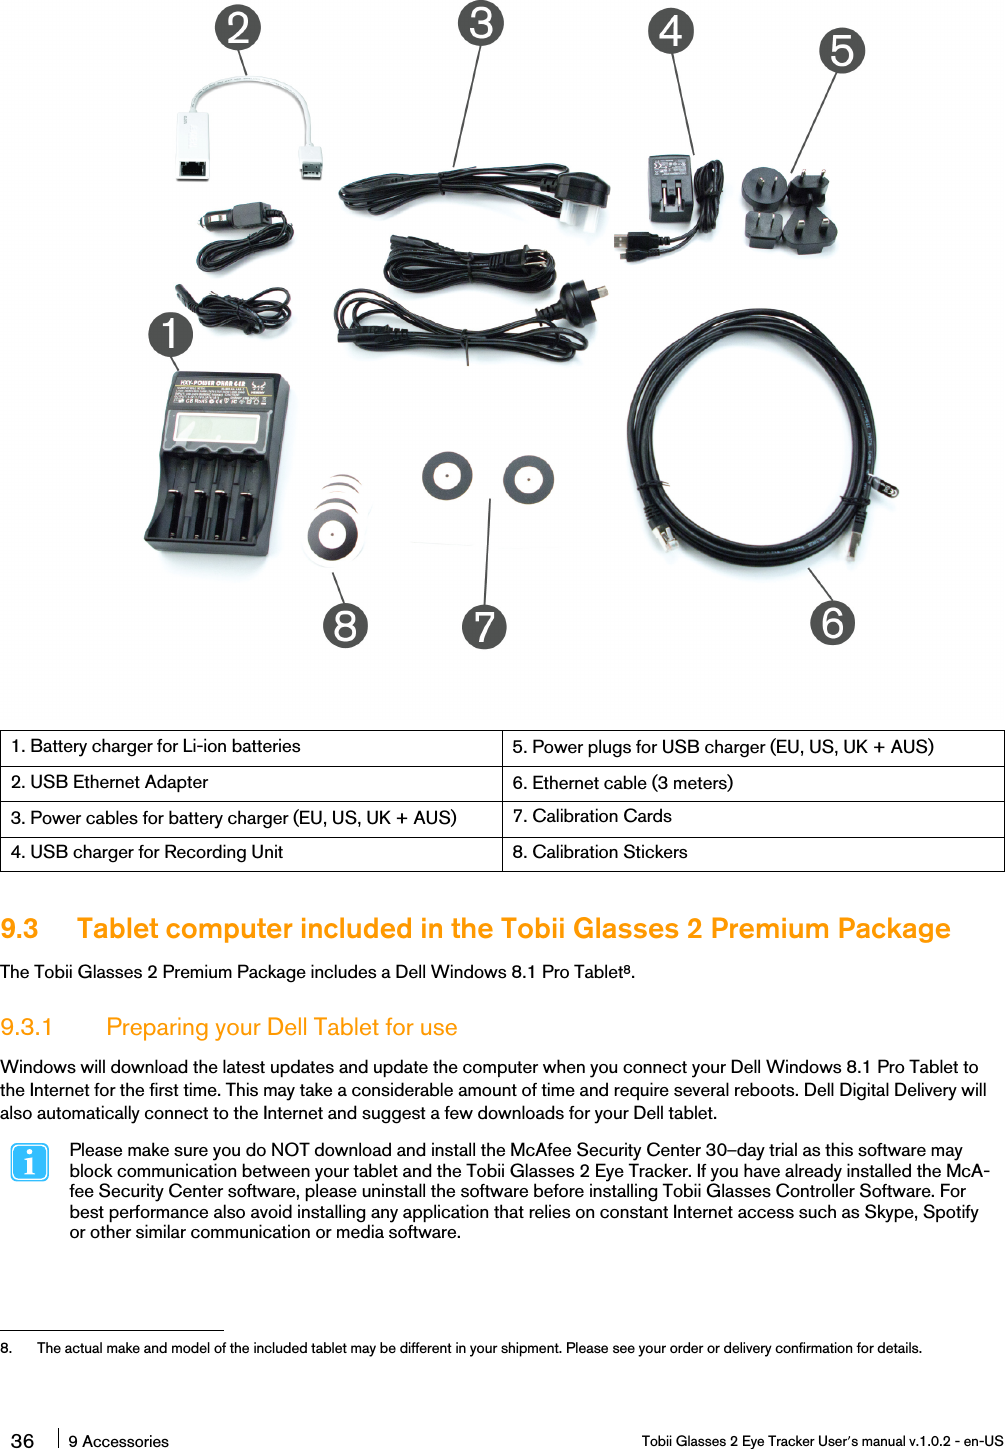 1. Battery charger for Li-ion batteries 5. Power plugs for USB charger (EU, US, UK + AUS)2. USB Ethernet Adapter 6. Ethernet cable (3 meters)3. Power cables for battery charger (EU, US, UK + AUS) 7. Calibration Cards4. USB charger for Recording Unit 8. Calibration Stickers9.3 Tablet computer included in the Tobii Glasses 2 Premium PackageThe Tobii Glasses 2 Premium Package includes a Dell Windows 8.1 Pro Tablet8.9.3.1 Preparing your Dell Tablet for useWindows will download the latest updates and update the computer when you connect your Dell Windows 8.1 Pro Tablet tothe Internet for the first time. This may take a considerable amount of time and require several reboots. Dell Digital Delivery willalso automatically connect to the Internet and suggest a few downloads for your Dell tablet.Please make sure you do NOT download and install the McAfee Security Center 30–day trial as this software mayblock communication between your tablet and the Tobii Glasses 2 Eye Tracker. If you have already installed the McA-fee Security Center software, please uninstall the software before installing Tobii Glasses Controller Software. Forbest performance also avoid installing any application that relies on constant Internet access such as Skype, Spotifyor other similar communication or media software.36 9 Accessories Tobii Glasses 2 Eye Tracker User’s manual v.1.0.2 - en-US8. The actual make and model of the included tablet may be different in your shipment. Please see your order or delivery confirmation for details.